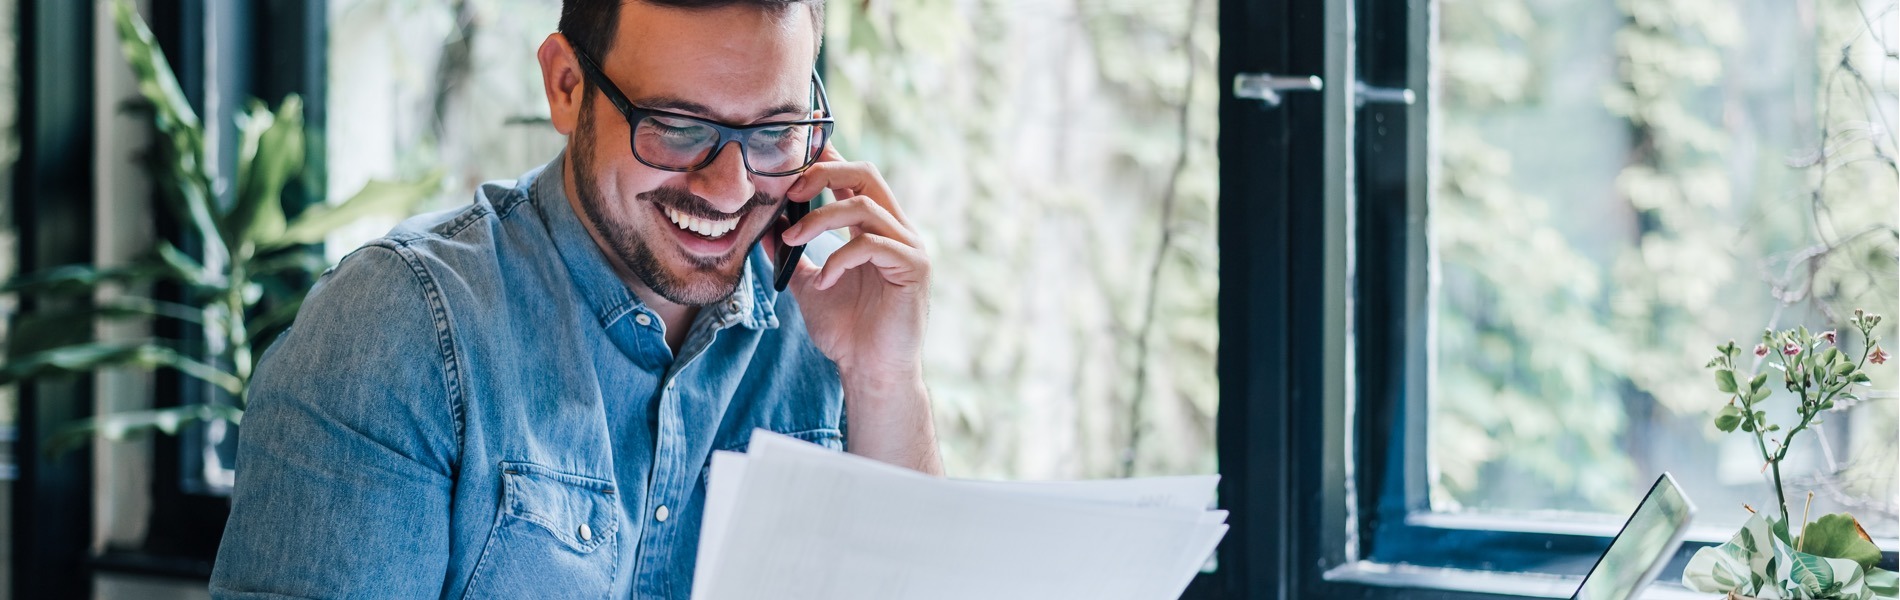 man smiling on phone discussing utility expense recovery